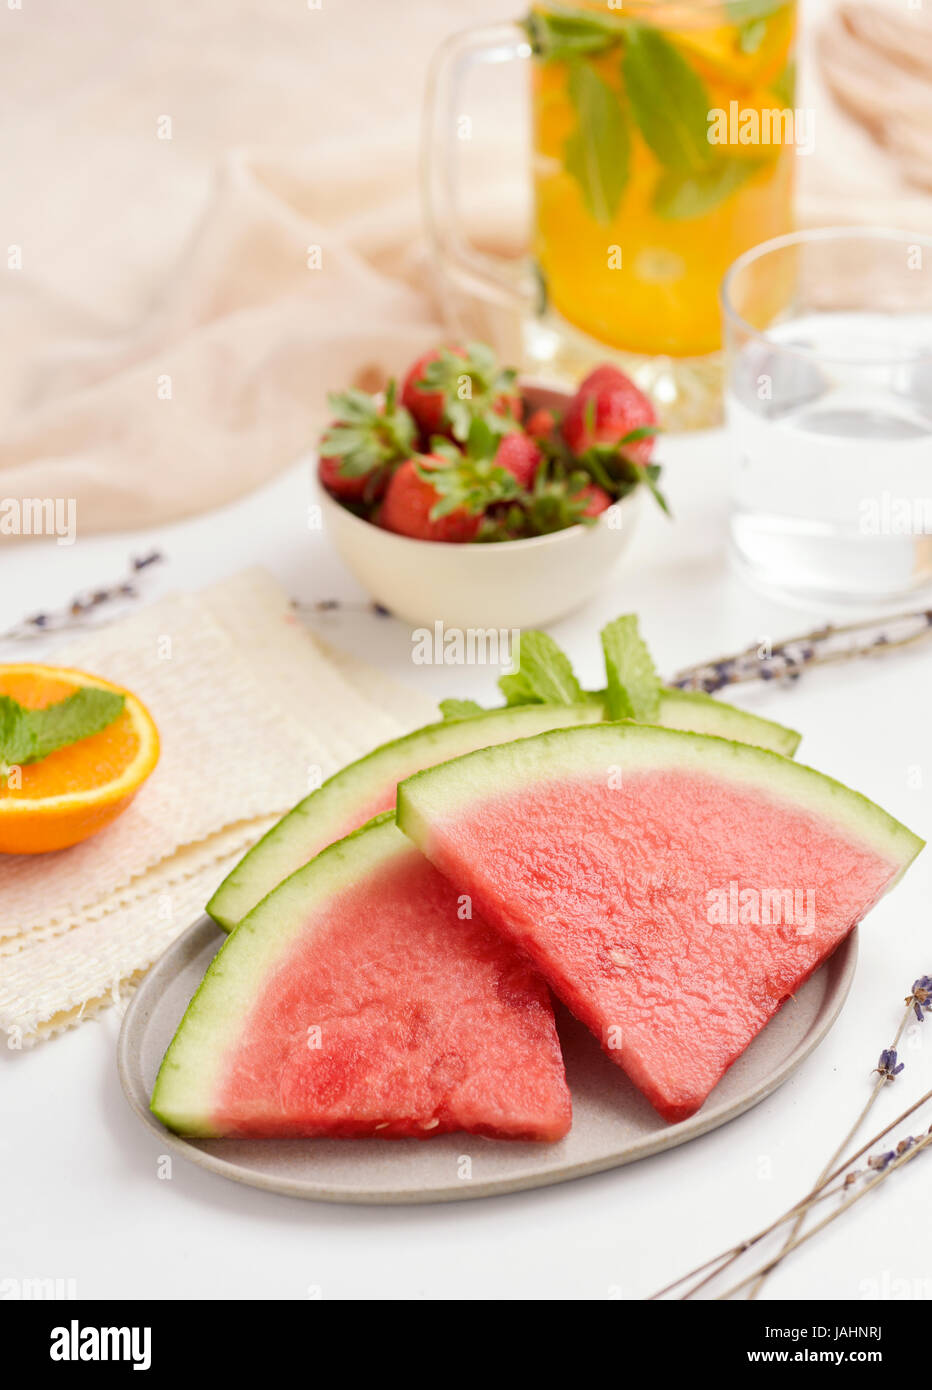 some slices of watermelon in a ceramic plate, a white ceramic bowl with strawberries and a jar with cold tea on a white a table Stock Photo